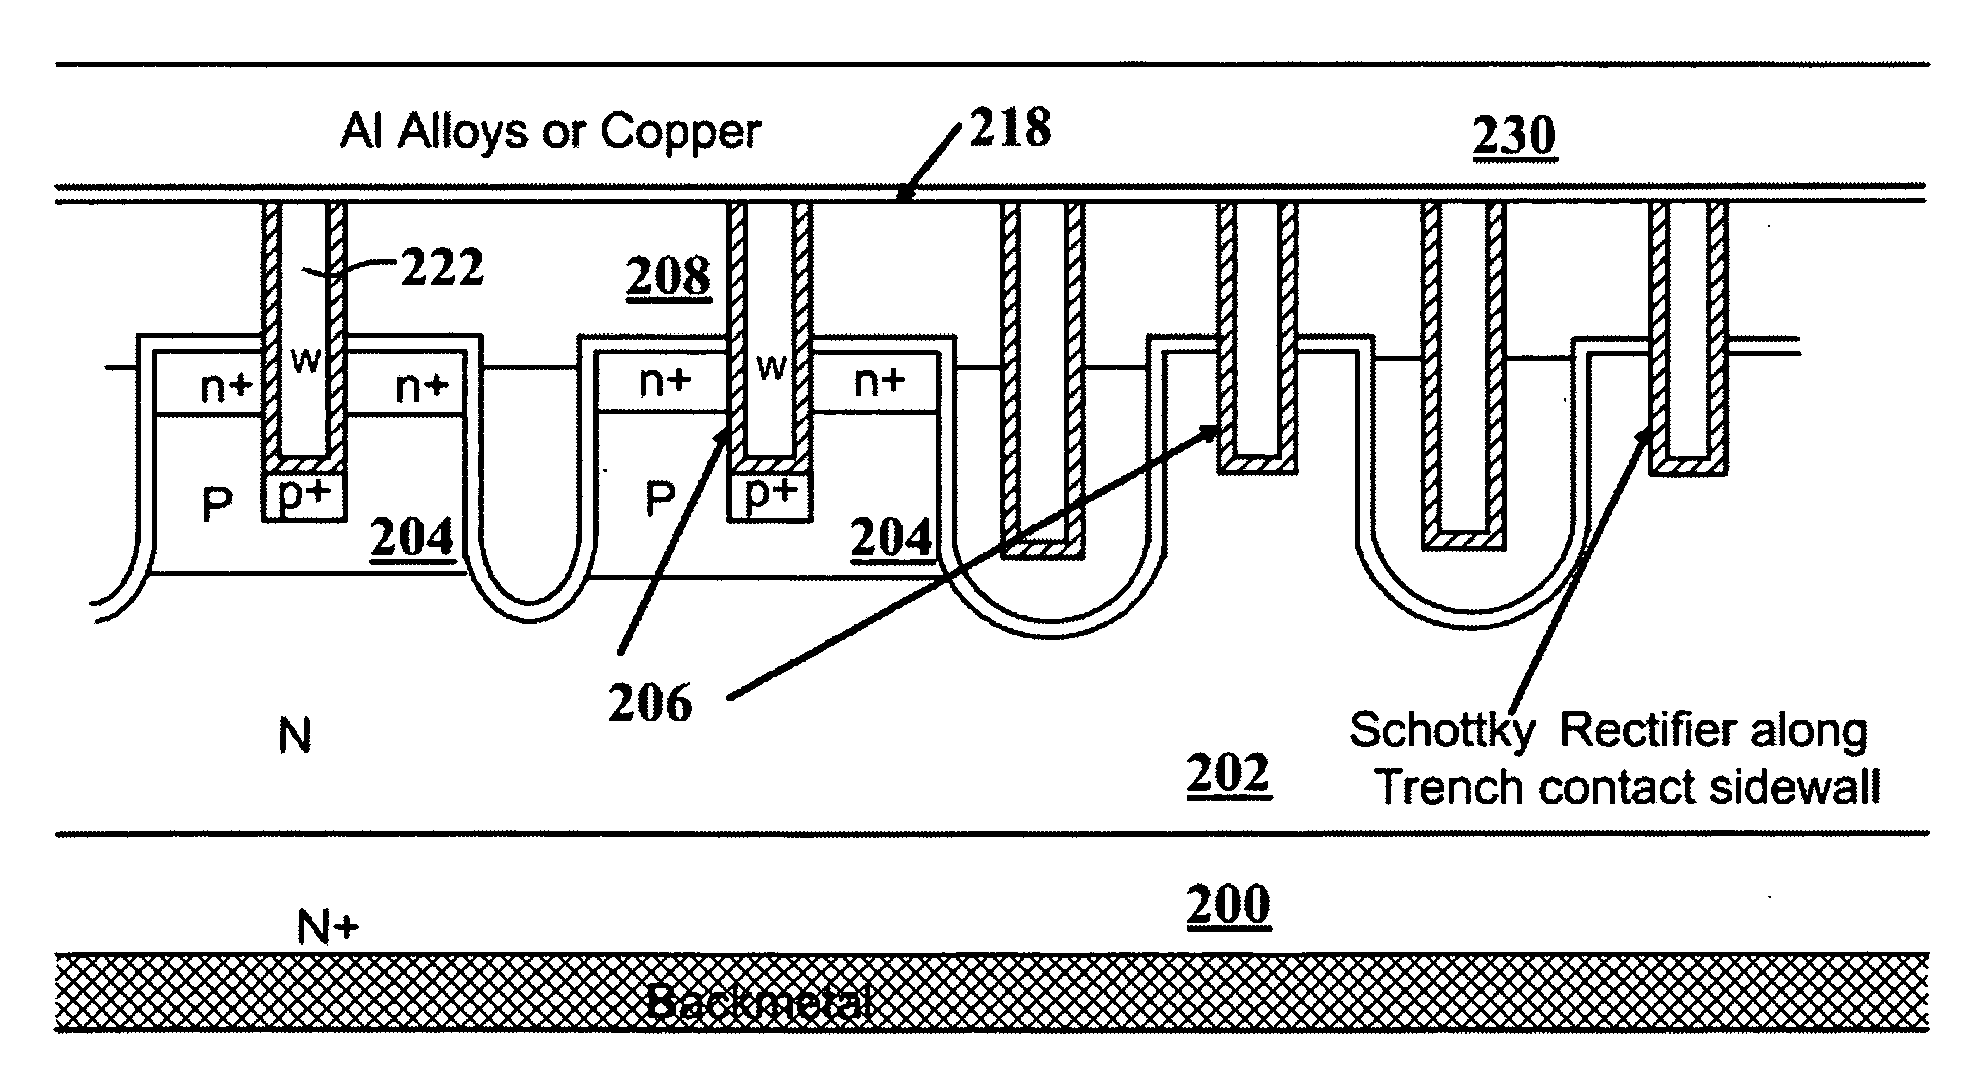 Integrated trench Mosfet and Schottky Rectifier with trench contact structure